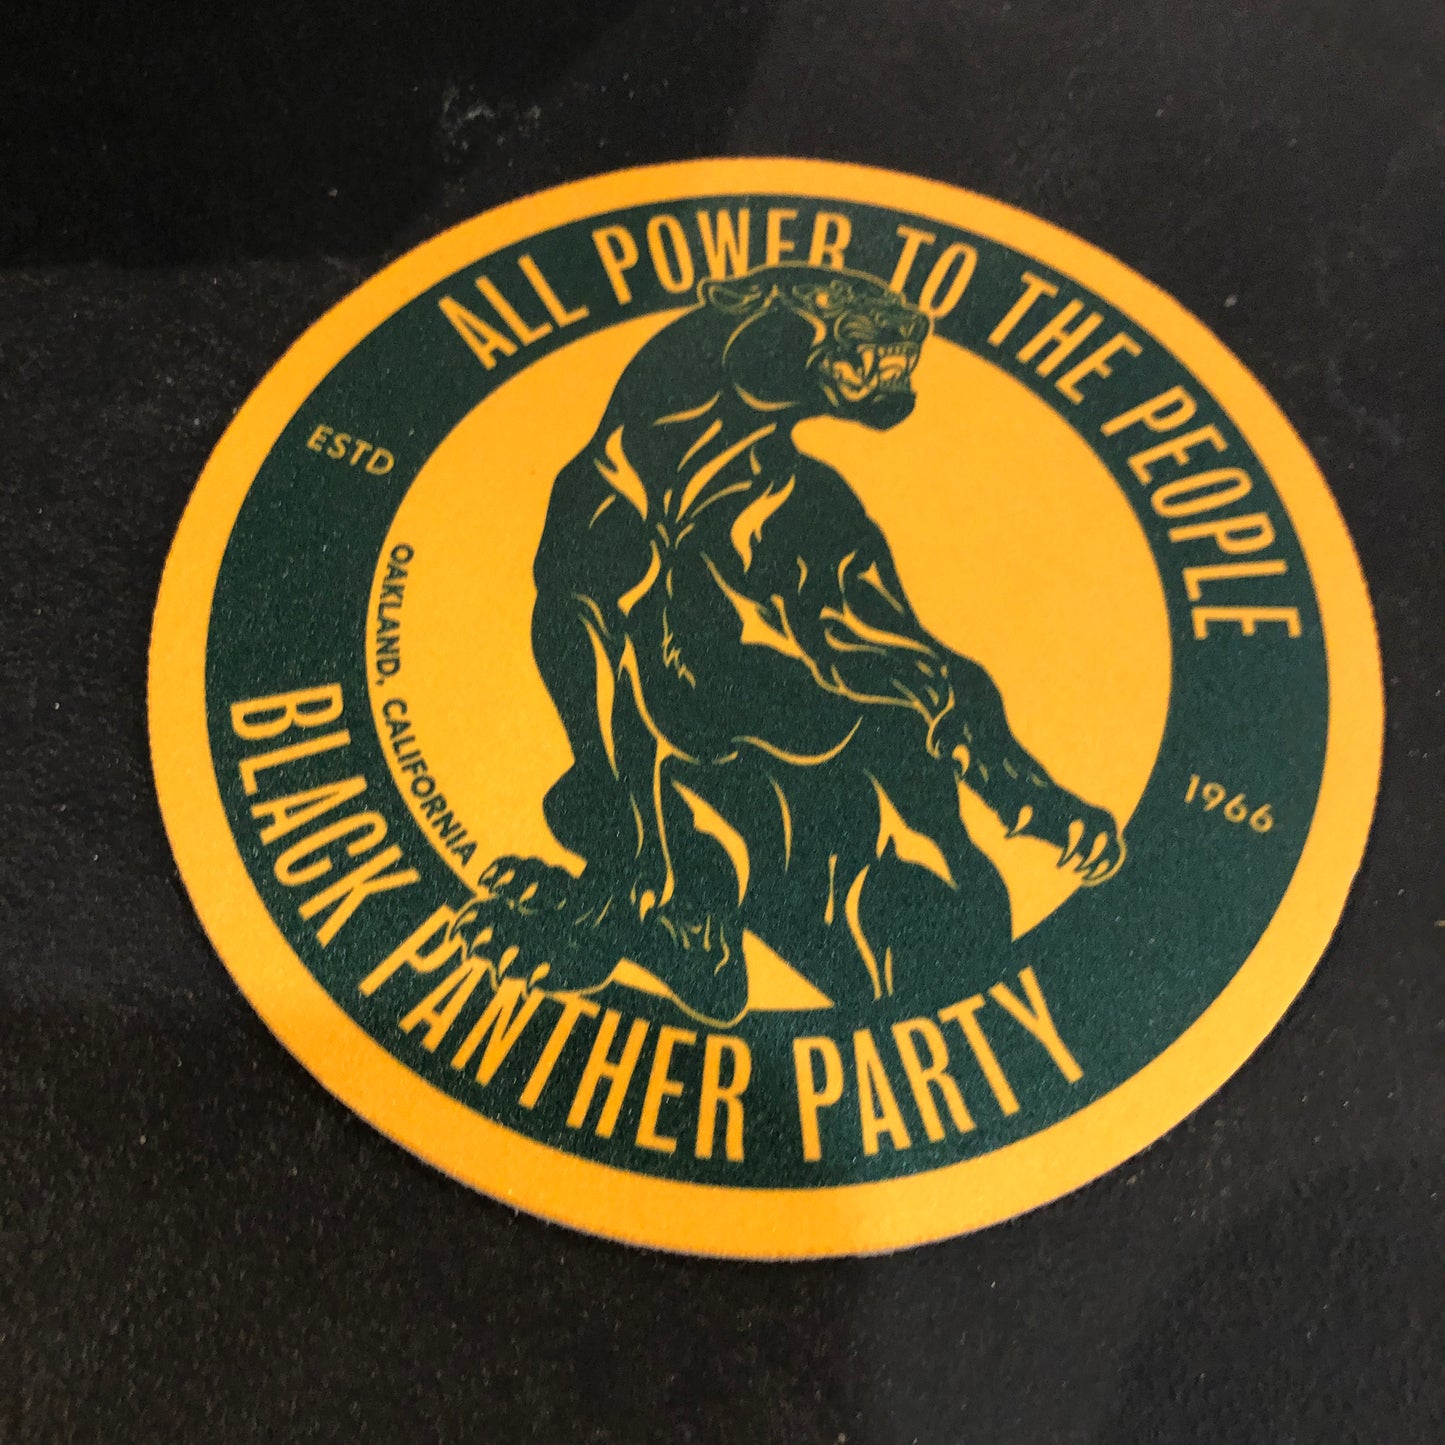 Stealworks "All Power to the People" Coaster